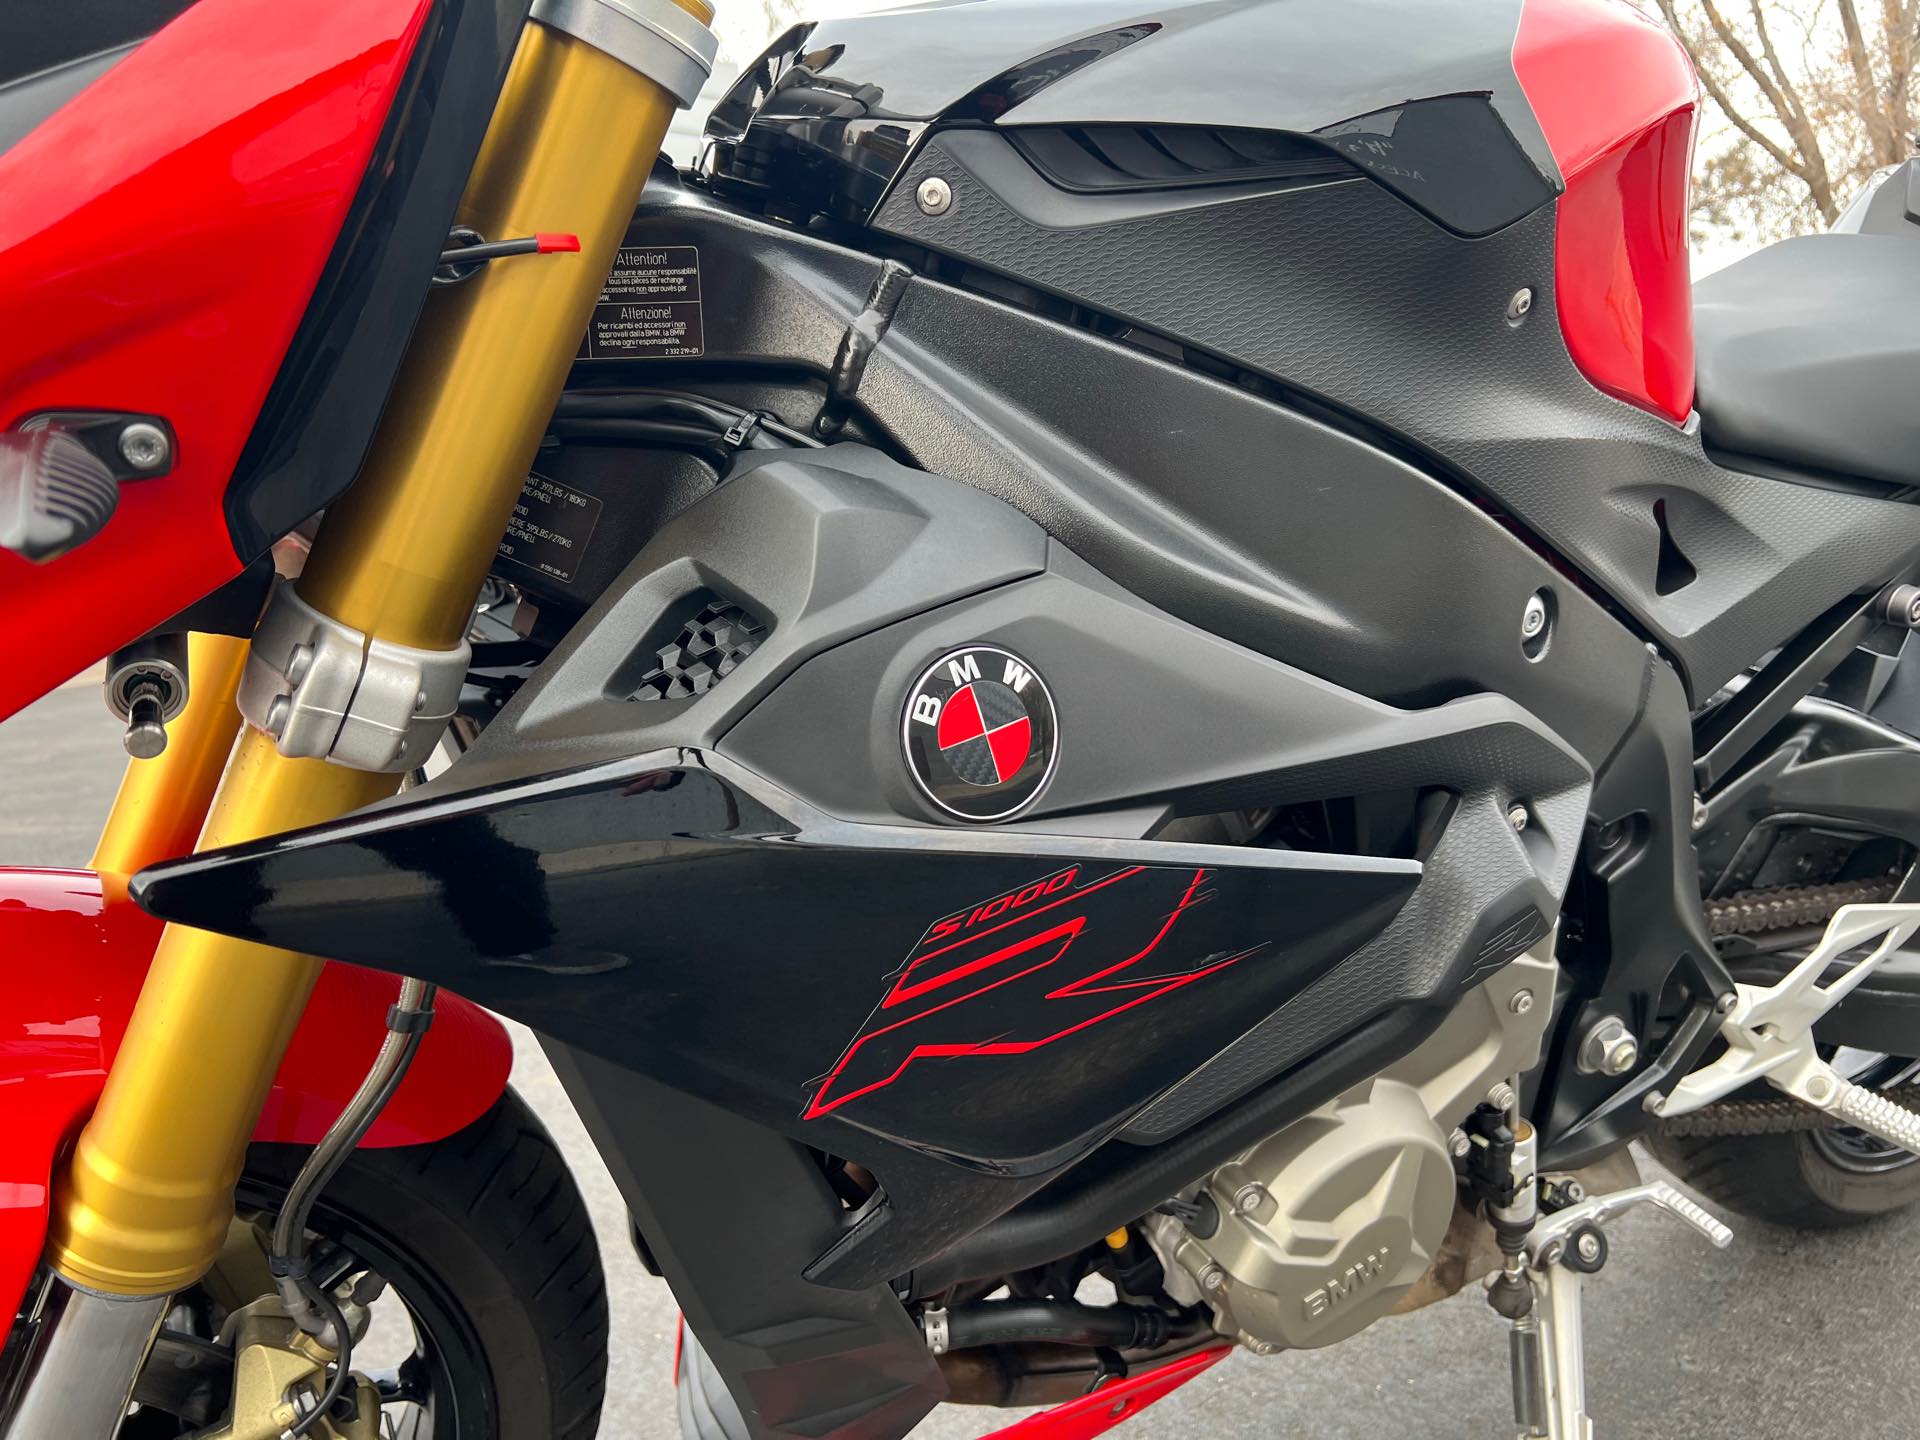 2018 BMW S 1000 R at Aces Motorcycles - Fort Collins